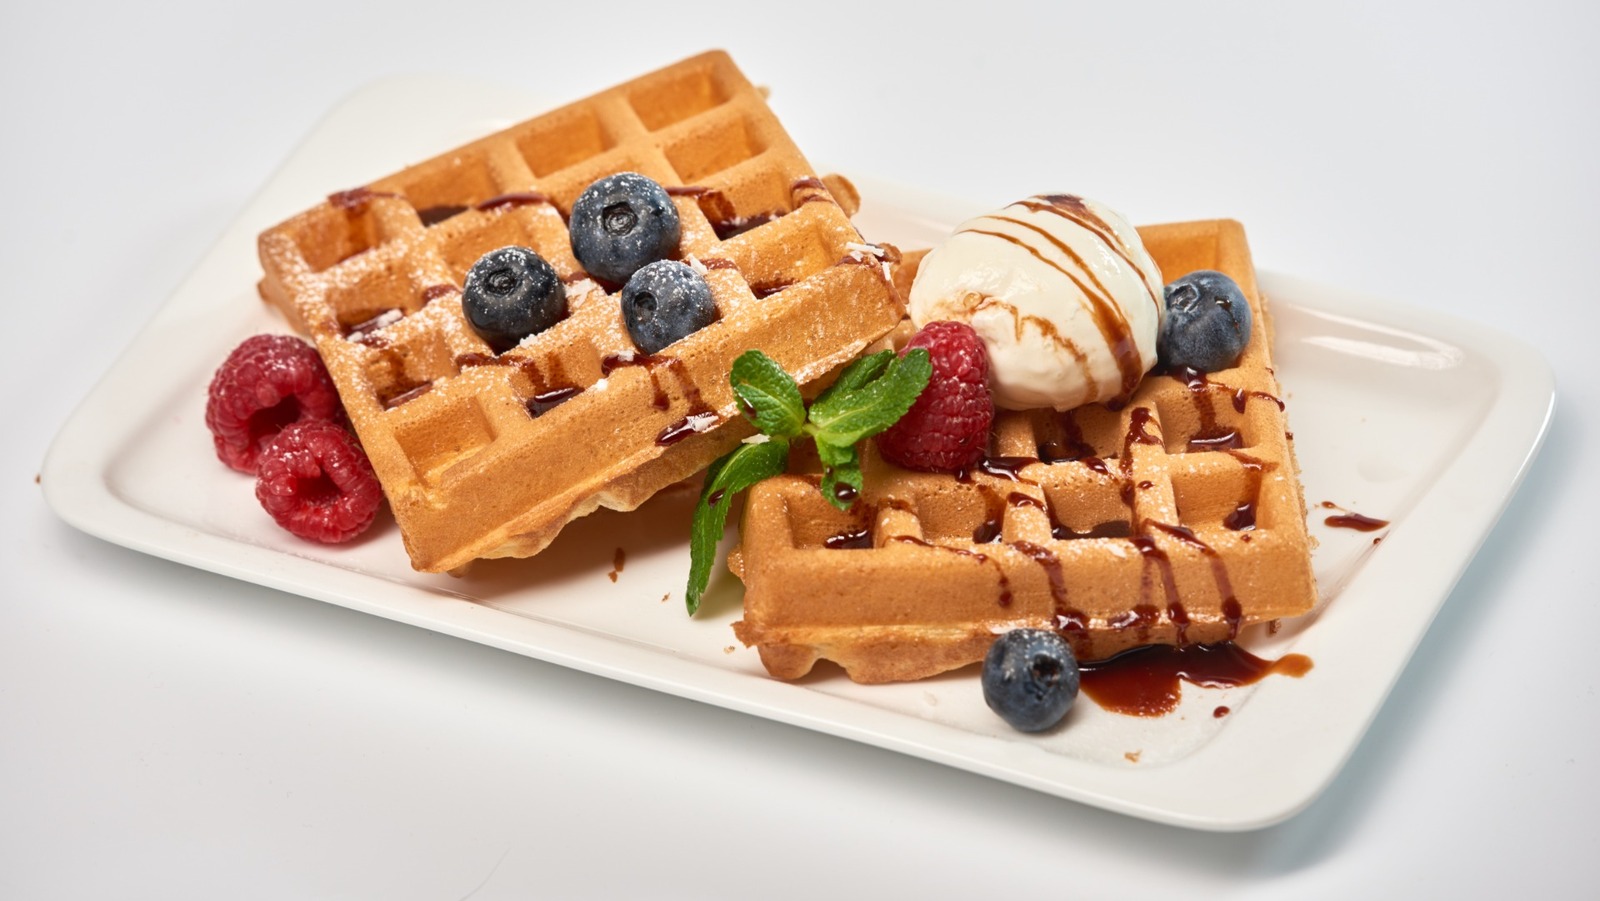 https://www.foodrepublic.com/img/gallery/13-upgrades-for-the-best-frozen-waffles-of-your-life/l-intro-1691685762.jpg